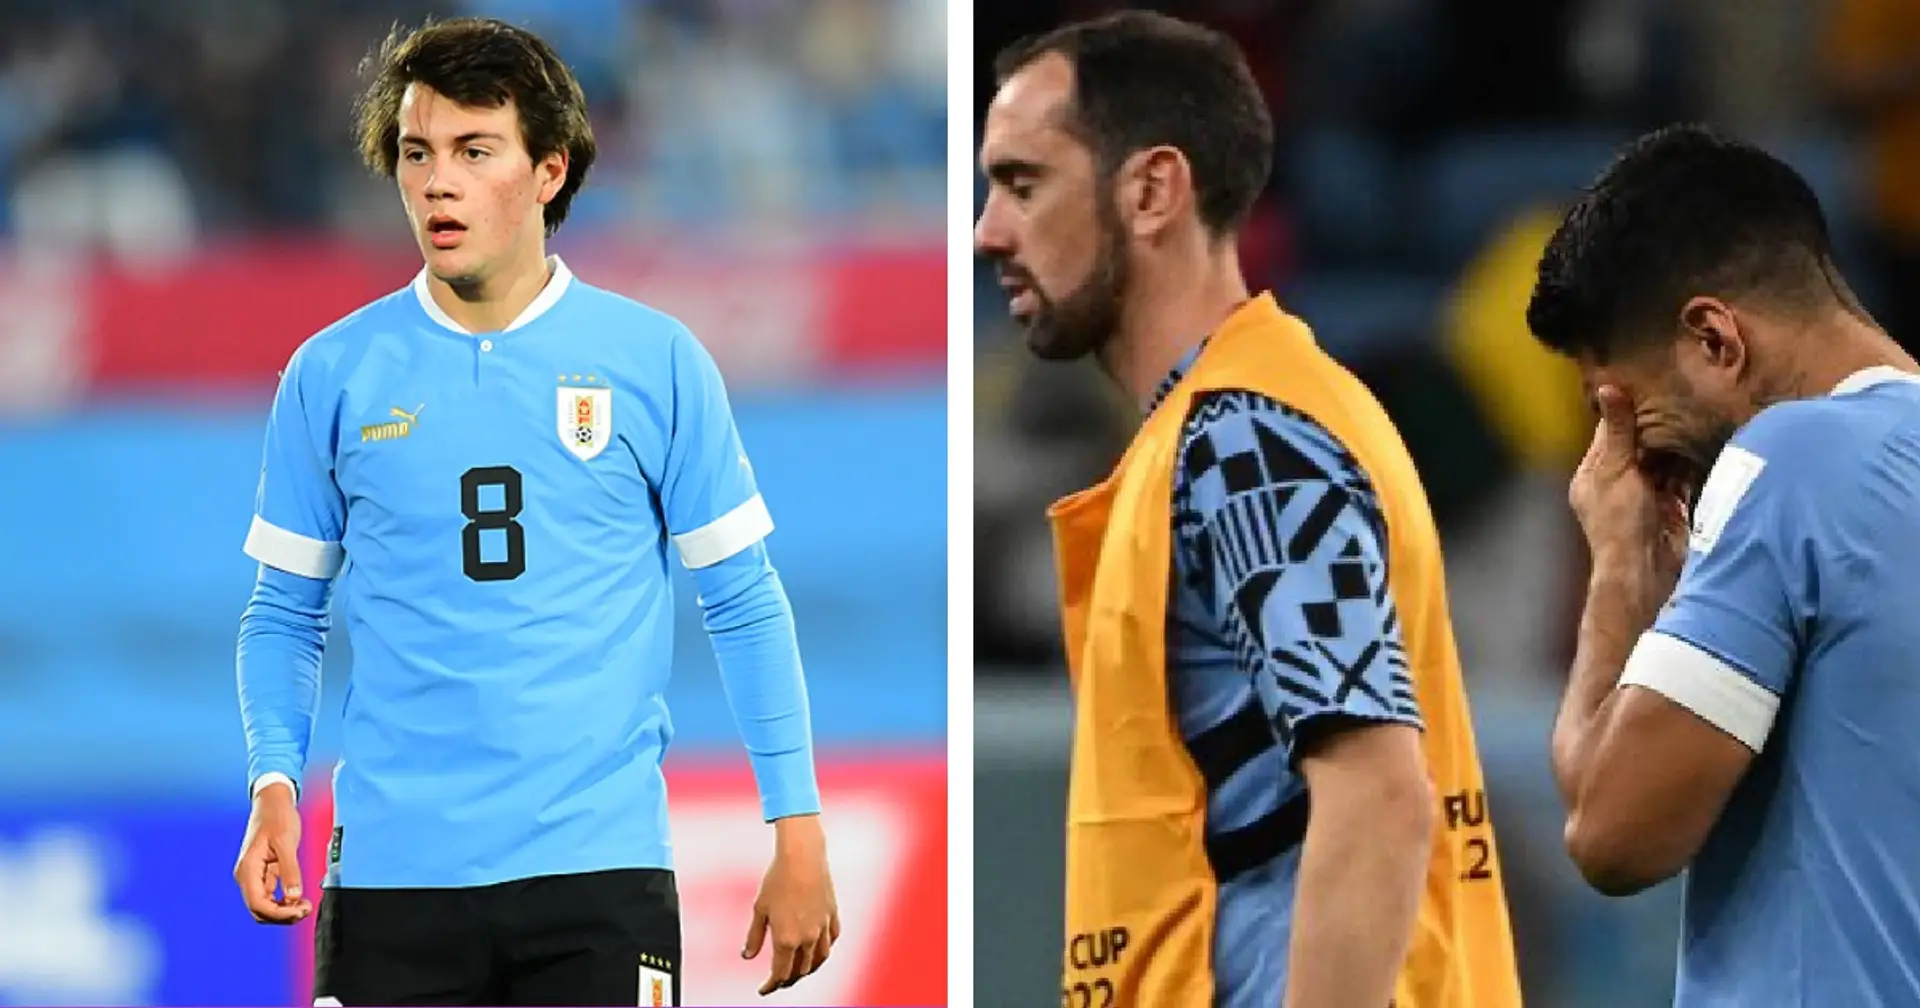 Pellistri bows out of World Cup & 2 more big Man United stories you might've missed